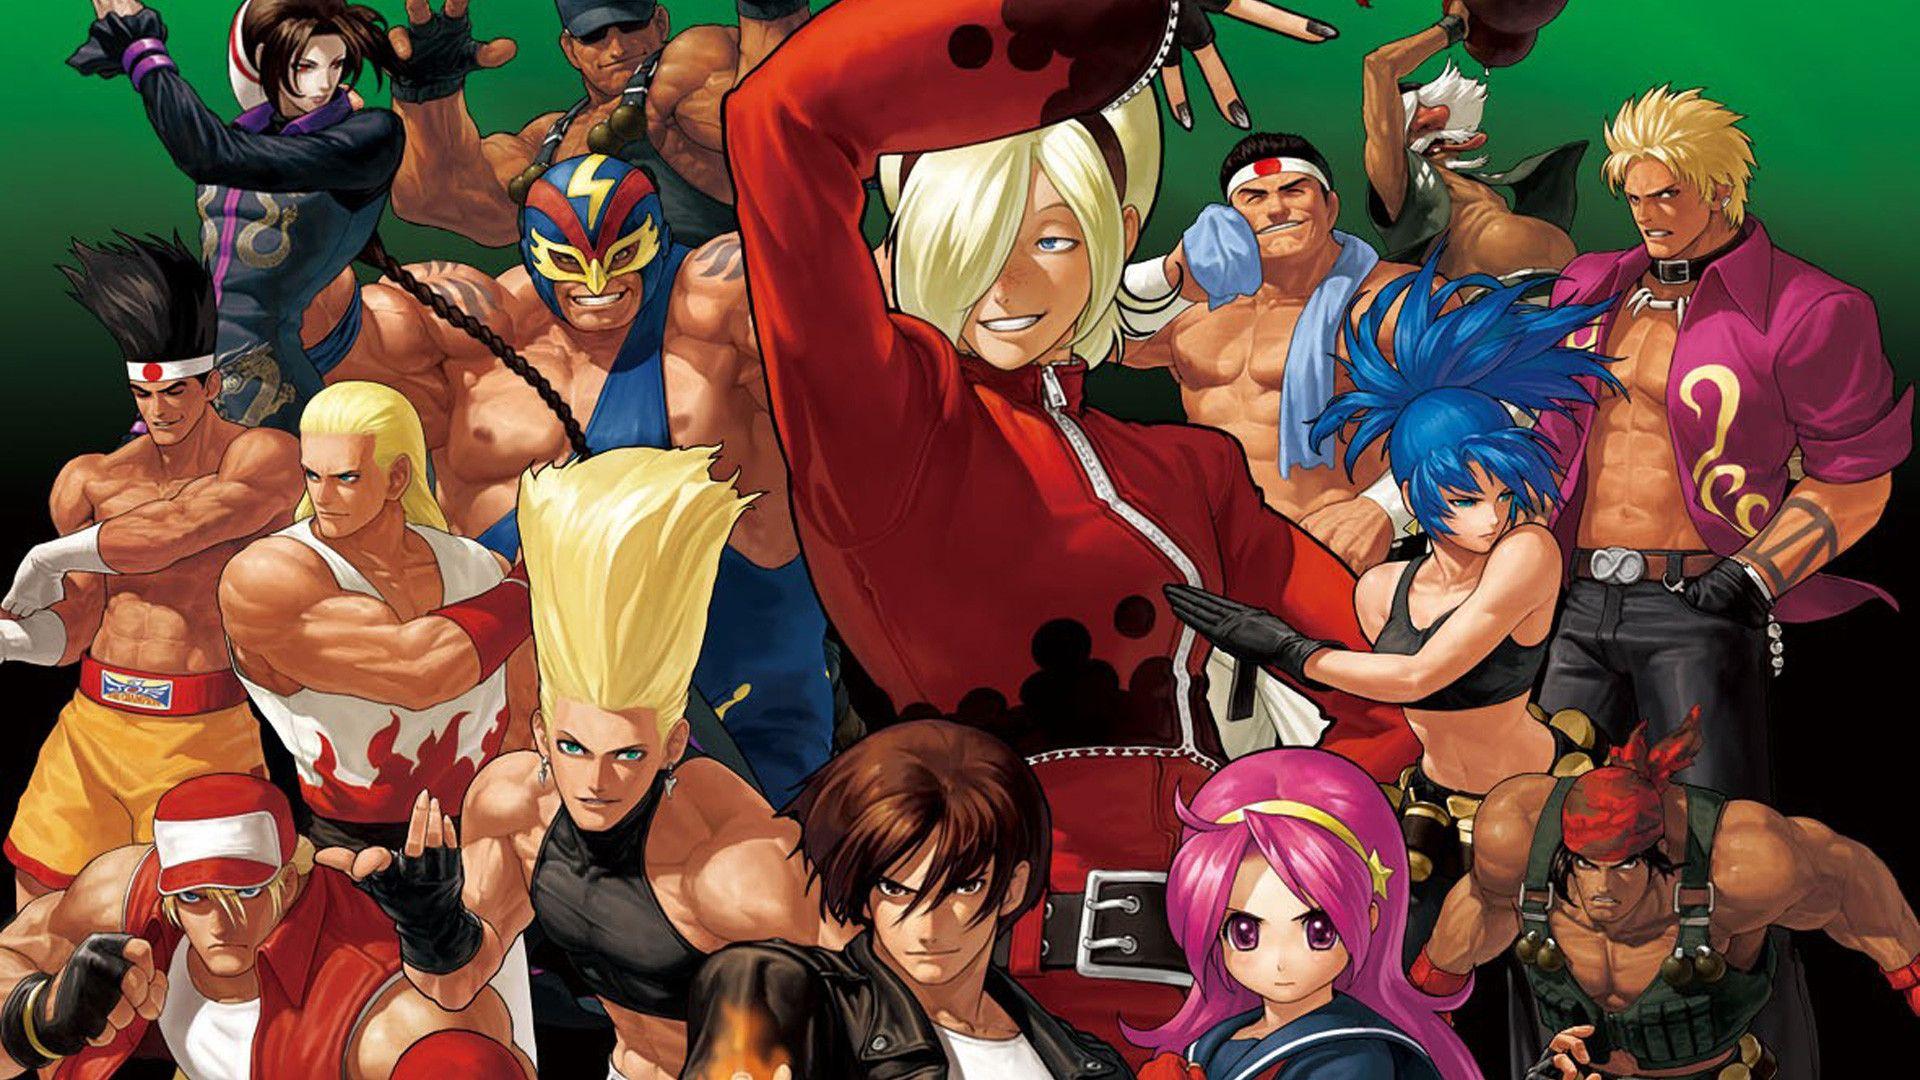 The King Of Fighters 2002 Wallpapers - Wallpaper Cave